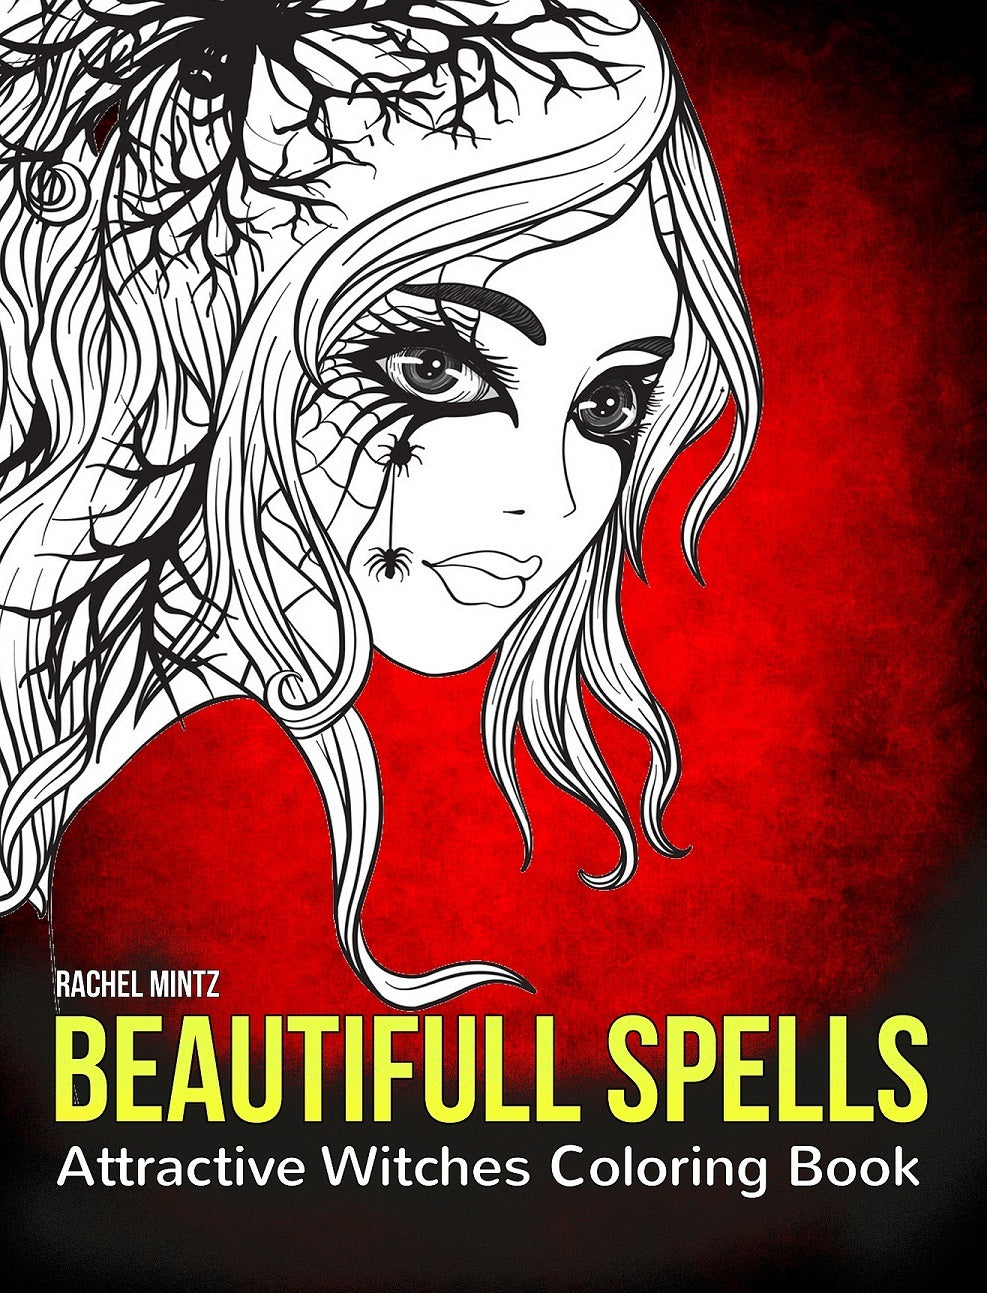 Beautiful Spells - Attractive Witches PDF Coloring Book For Adults